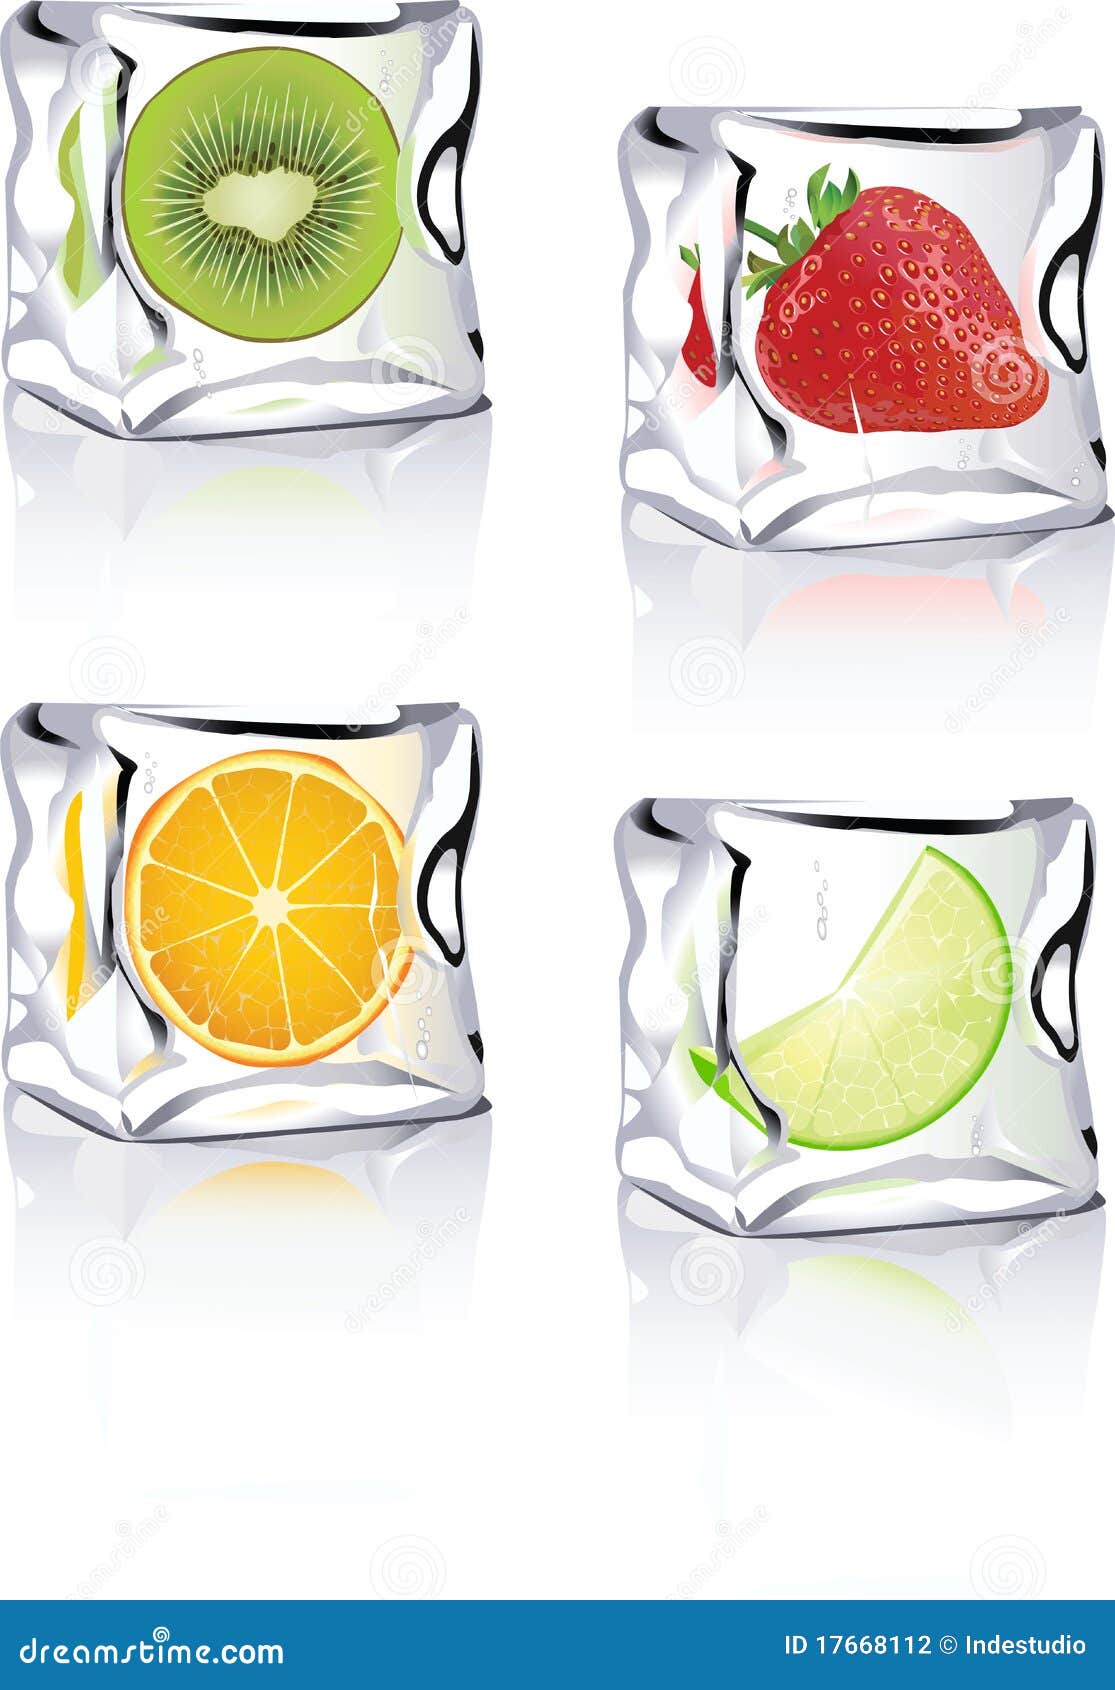 fruits in ice cube icons for vista, xp, print